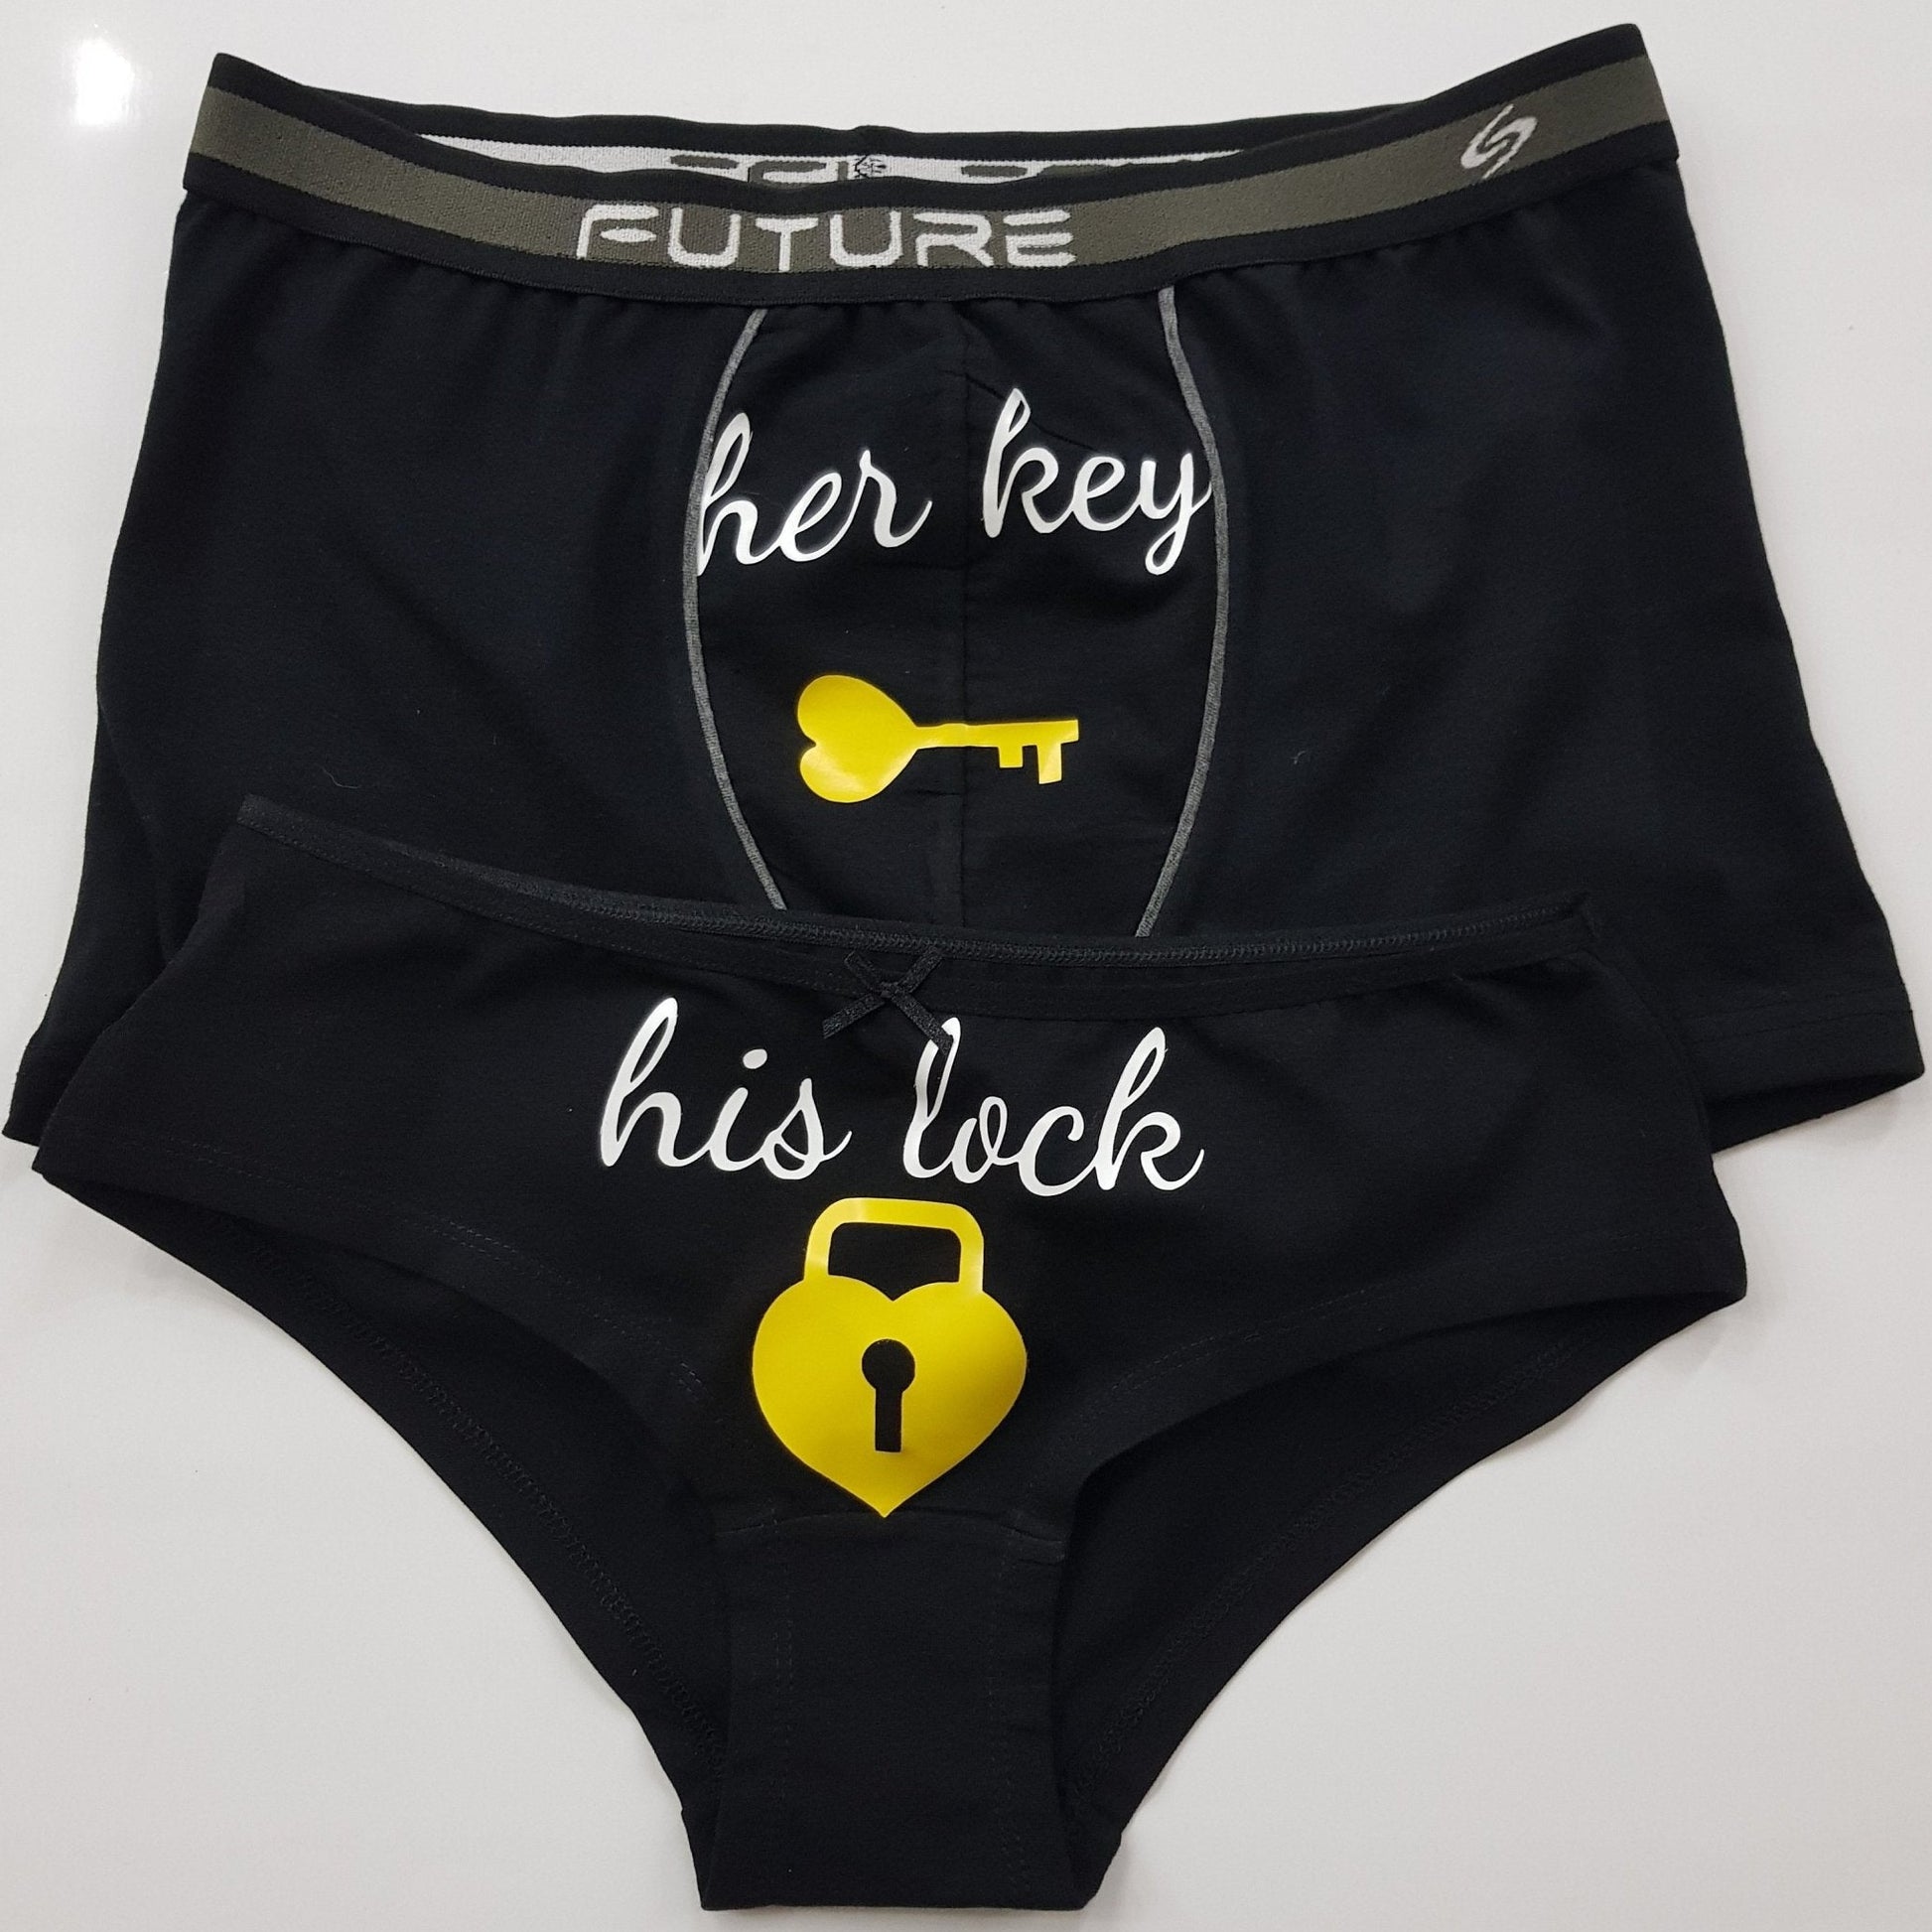 Buy Couples Underwear Set His Lock Her Key His and Hers Matching Underwear  Set Cotton Anniversary Gift Online in India 